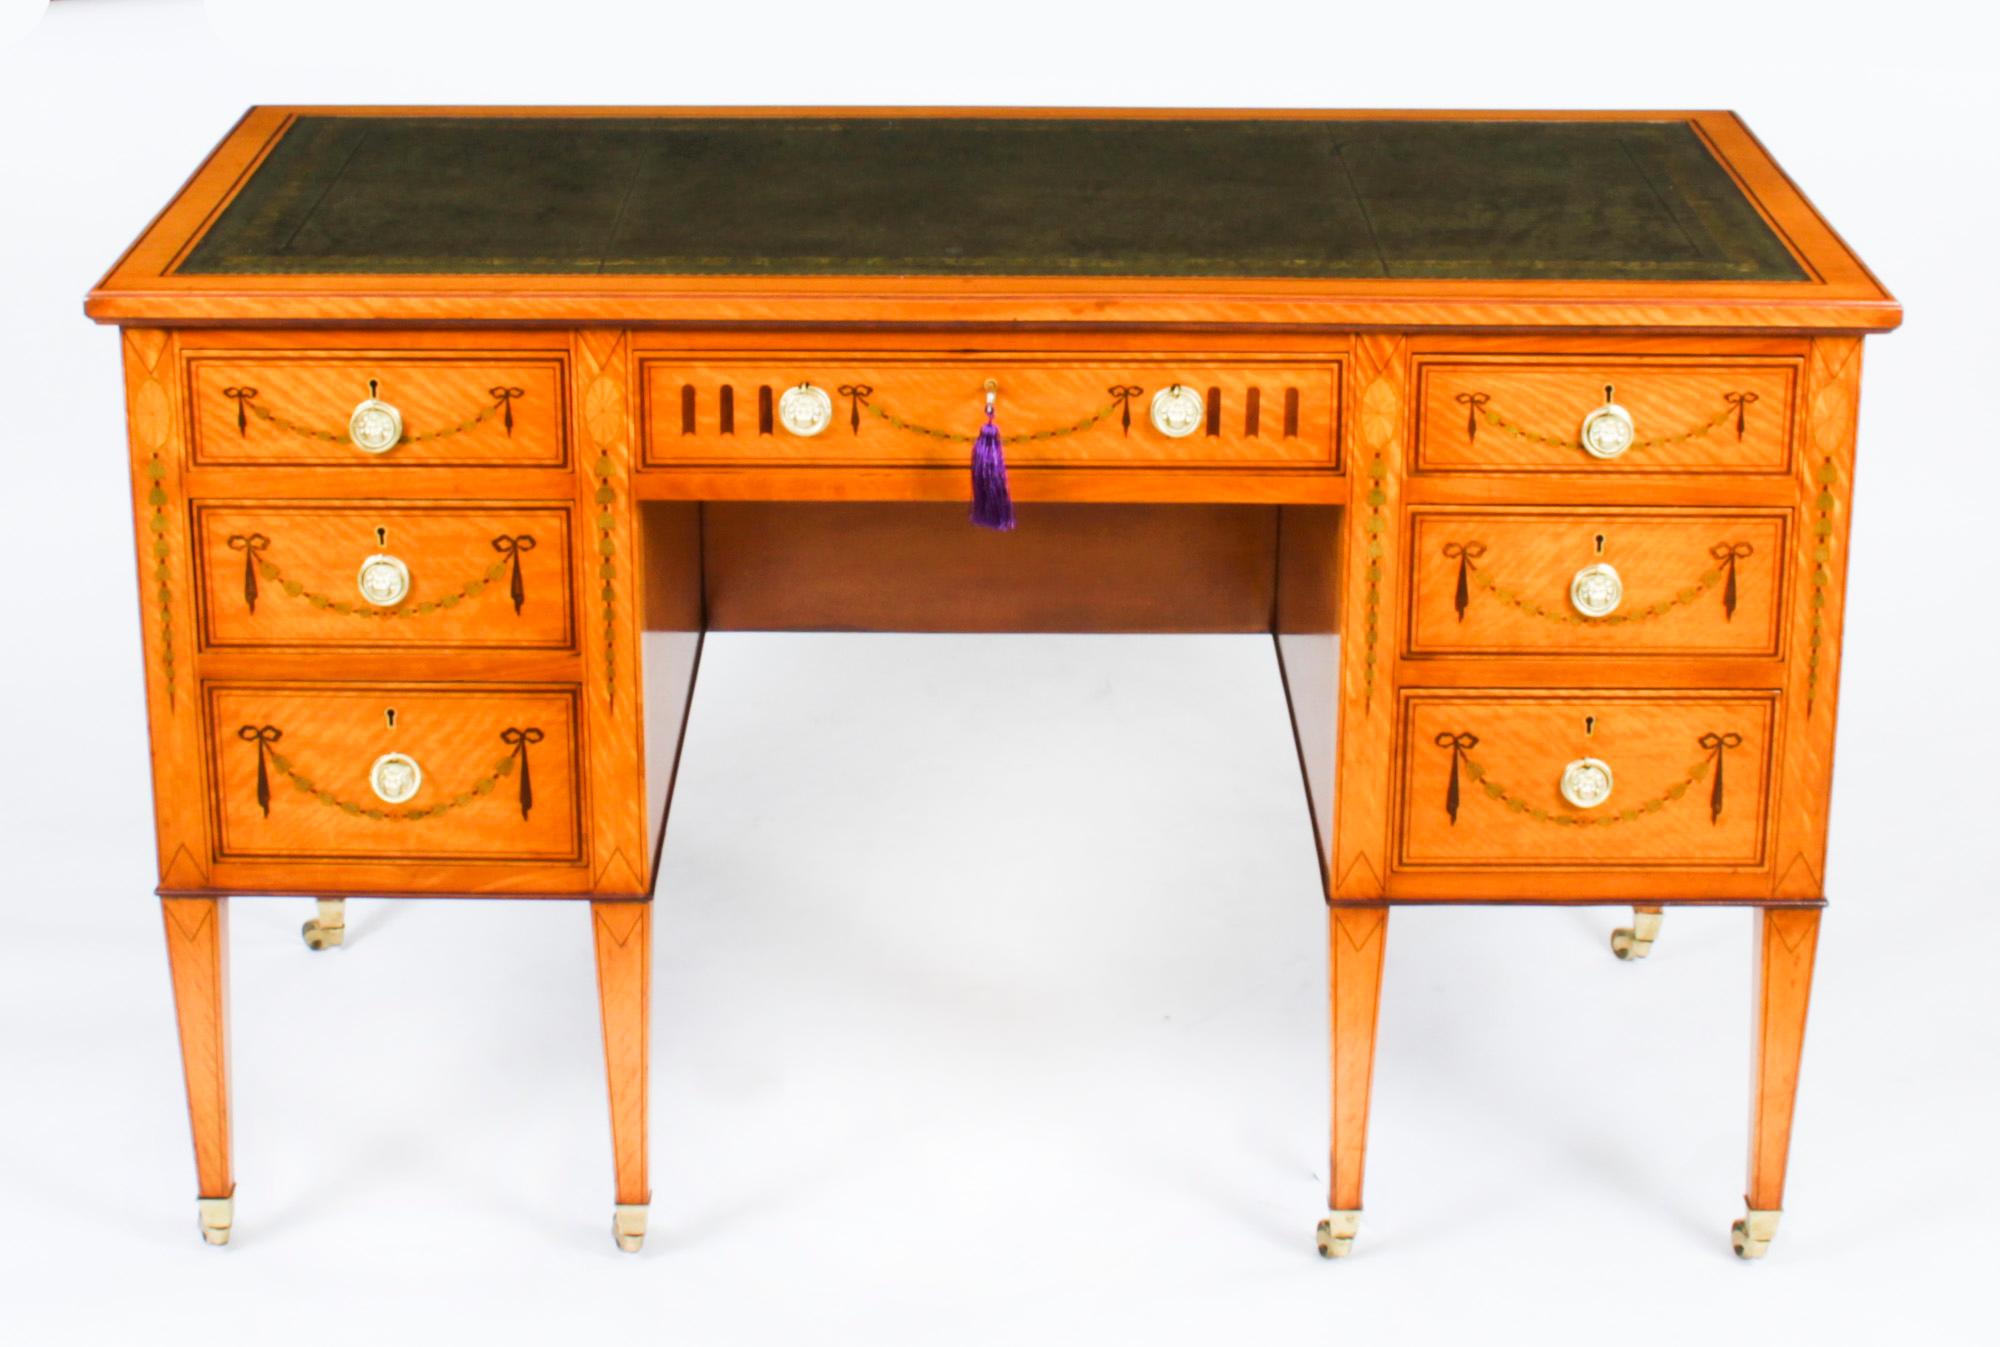 This is a sublime satinwood and marquetry desk by Edwards & Roberts, Circa 1880 in date. 

This gorgeous desk is freestanding and has been crafted from beautiful satinwood which has been masterfully inlaid with a marquetry of ribbons, swags and